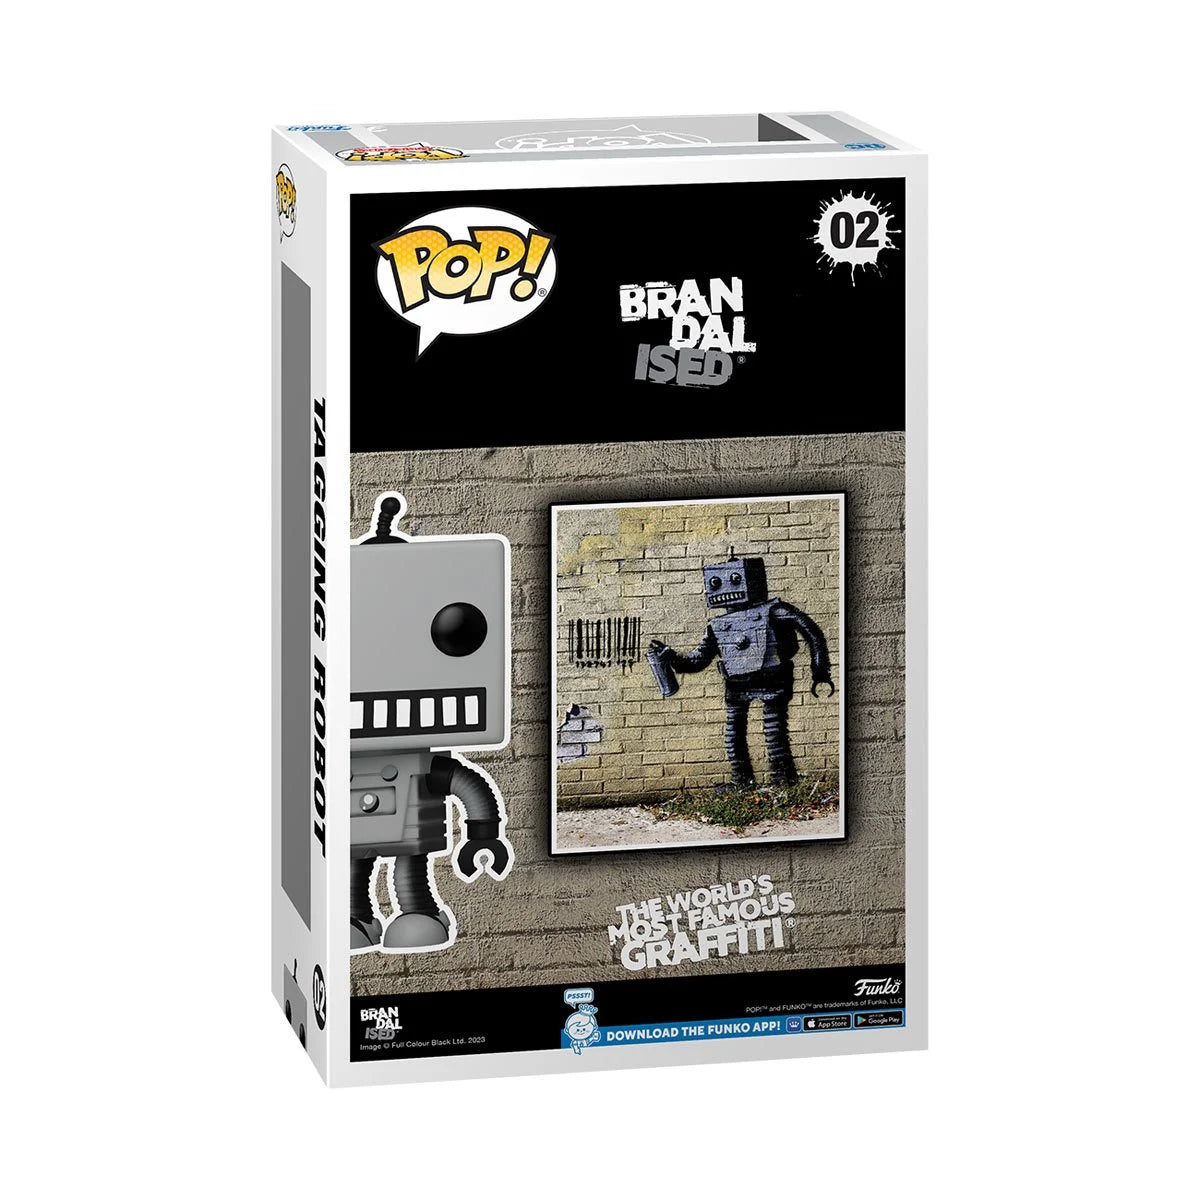 Tagging Robot Brandalised Pop! Art Cover Figure with Case